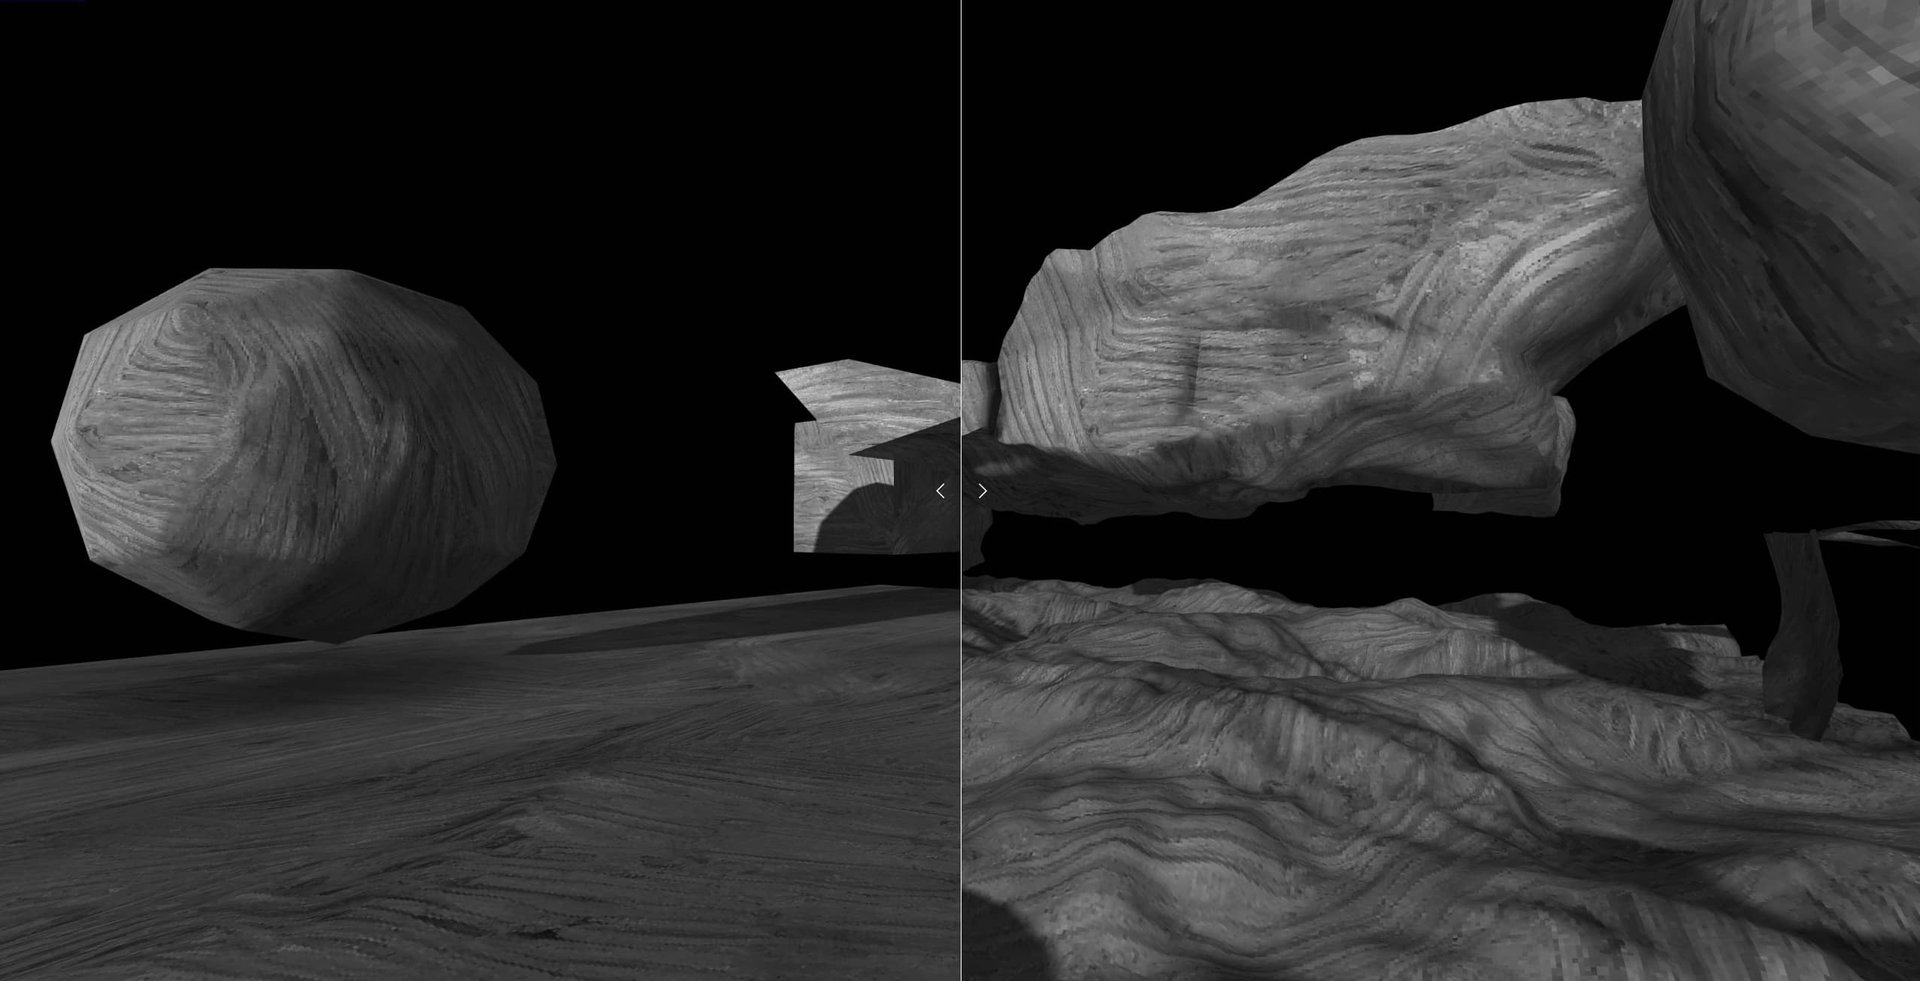 A side-by-side comparison of pre and post deformation versions of a scene rendered in Three.JS against a pure black background.  The scene consists of a gray rectangular platform with several geometric shapes hovering over it, colored with a gray stone or concrete-like material.  The left shows mostly rough and simple forms, while the right is much more organic-looking with lots of curves, warps, and shadows visible.